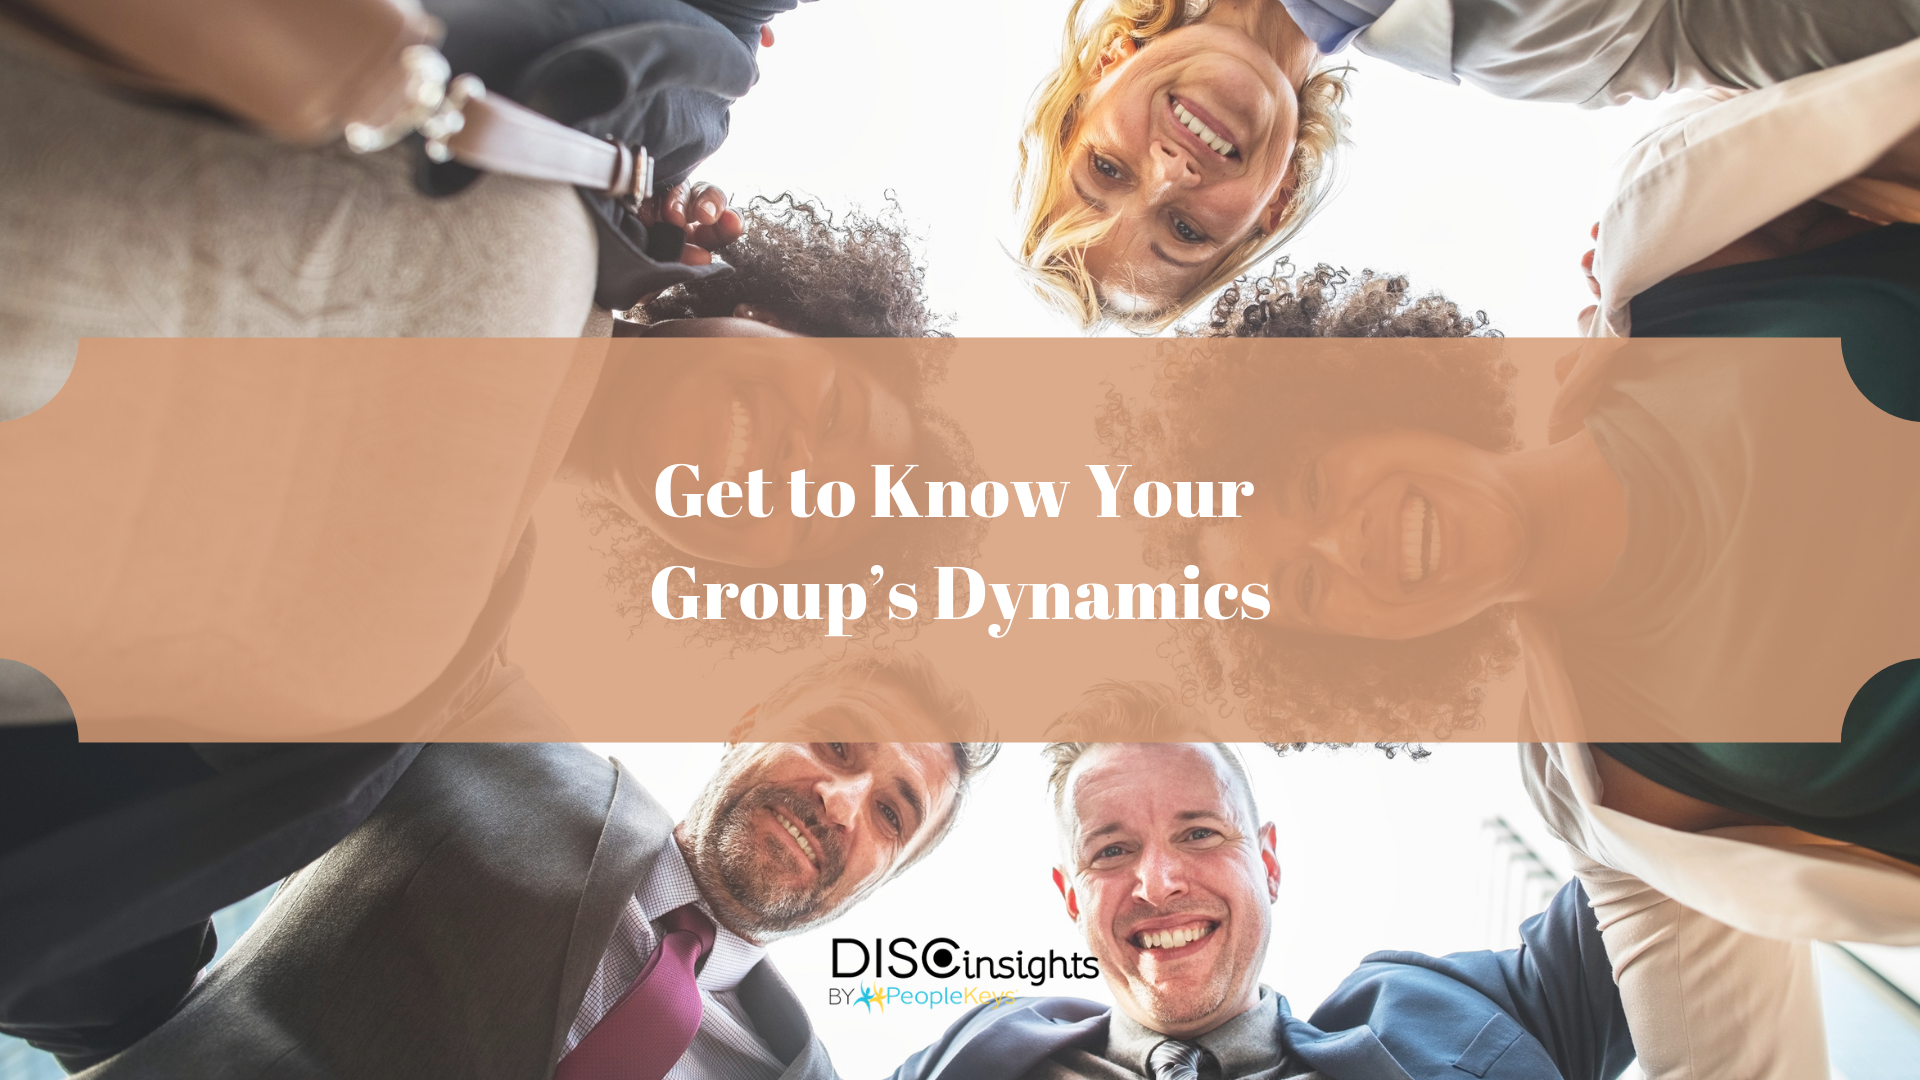 Get to Know Your Group’s Dynamics